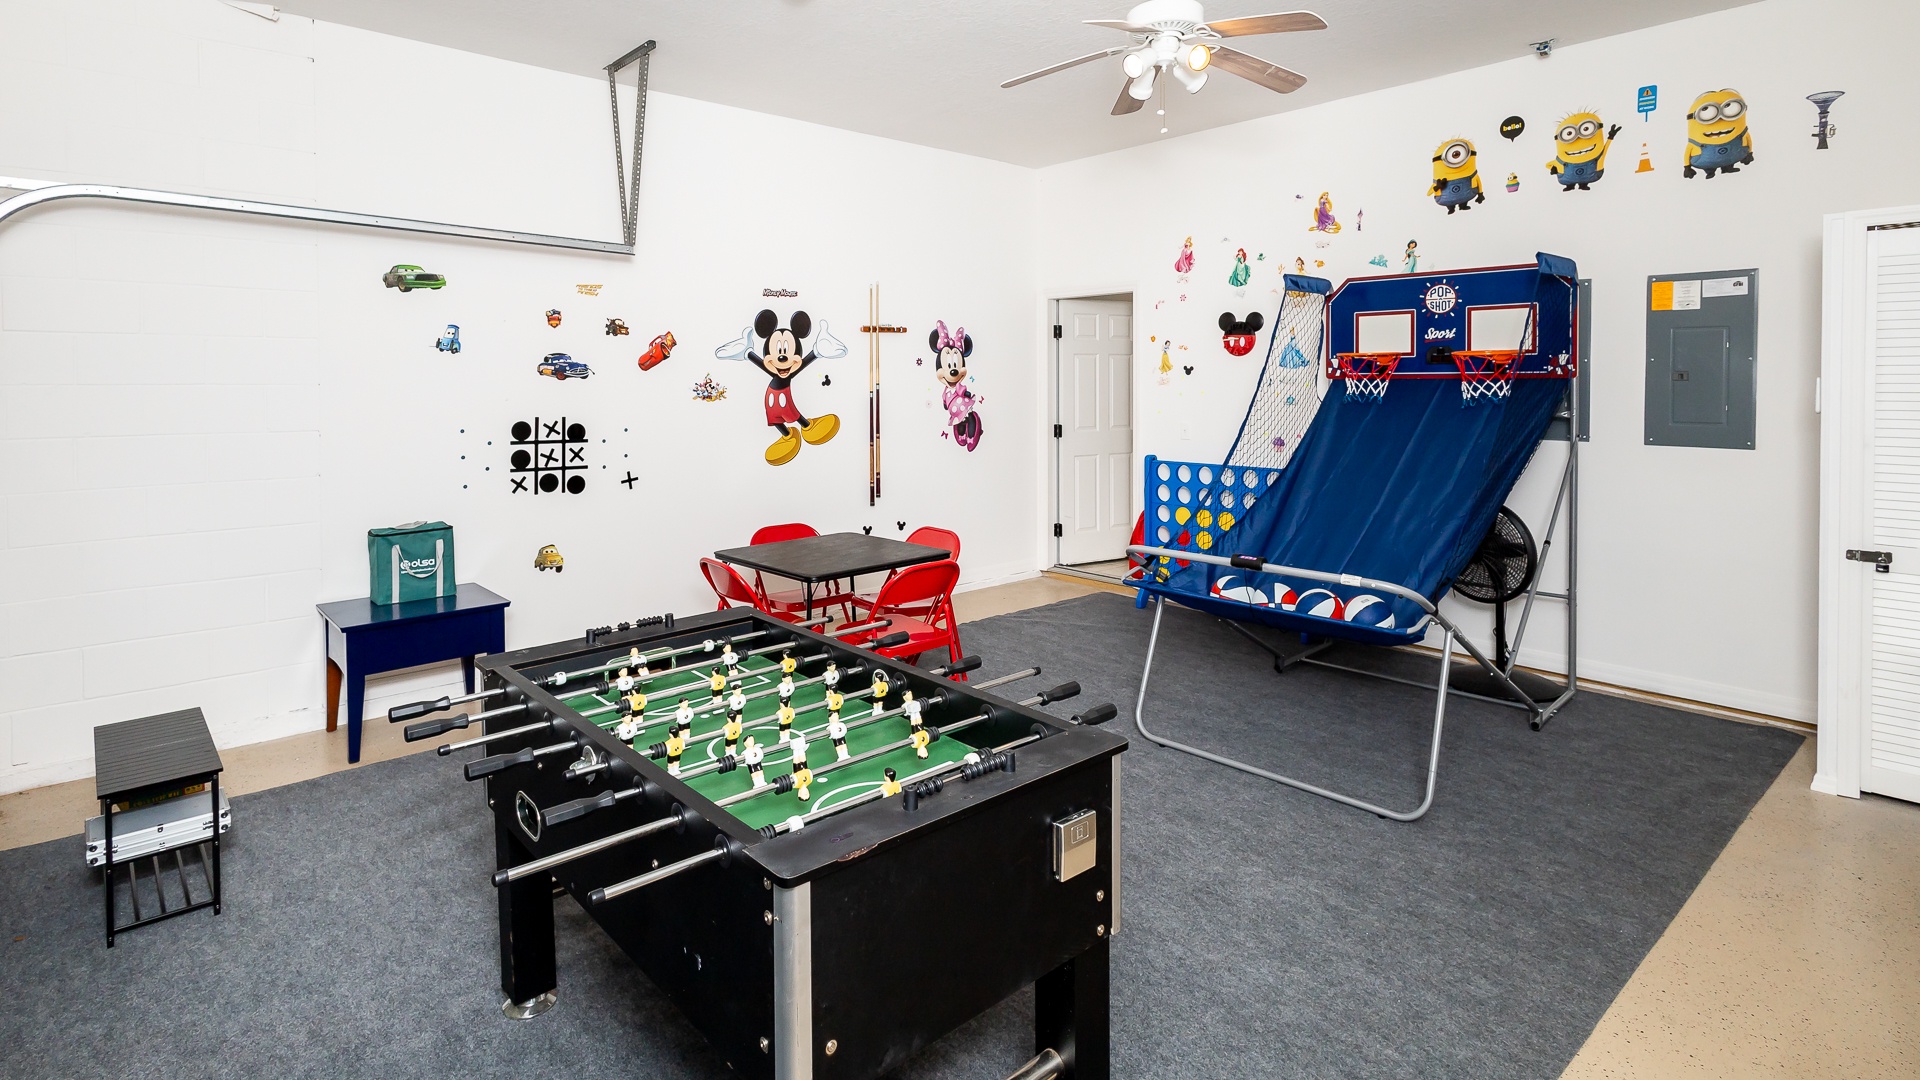 Endless fun awaits in the game room